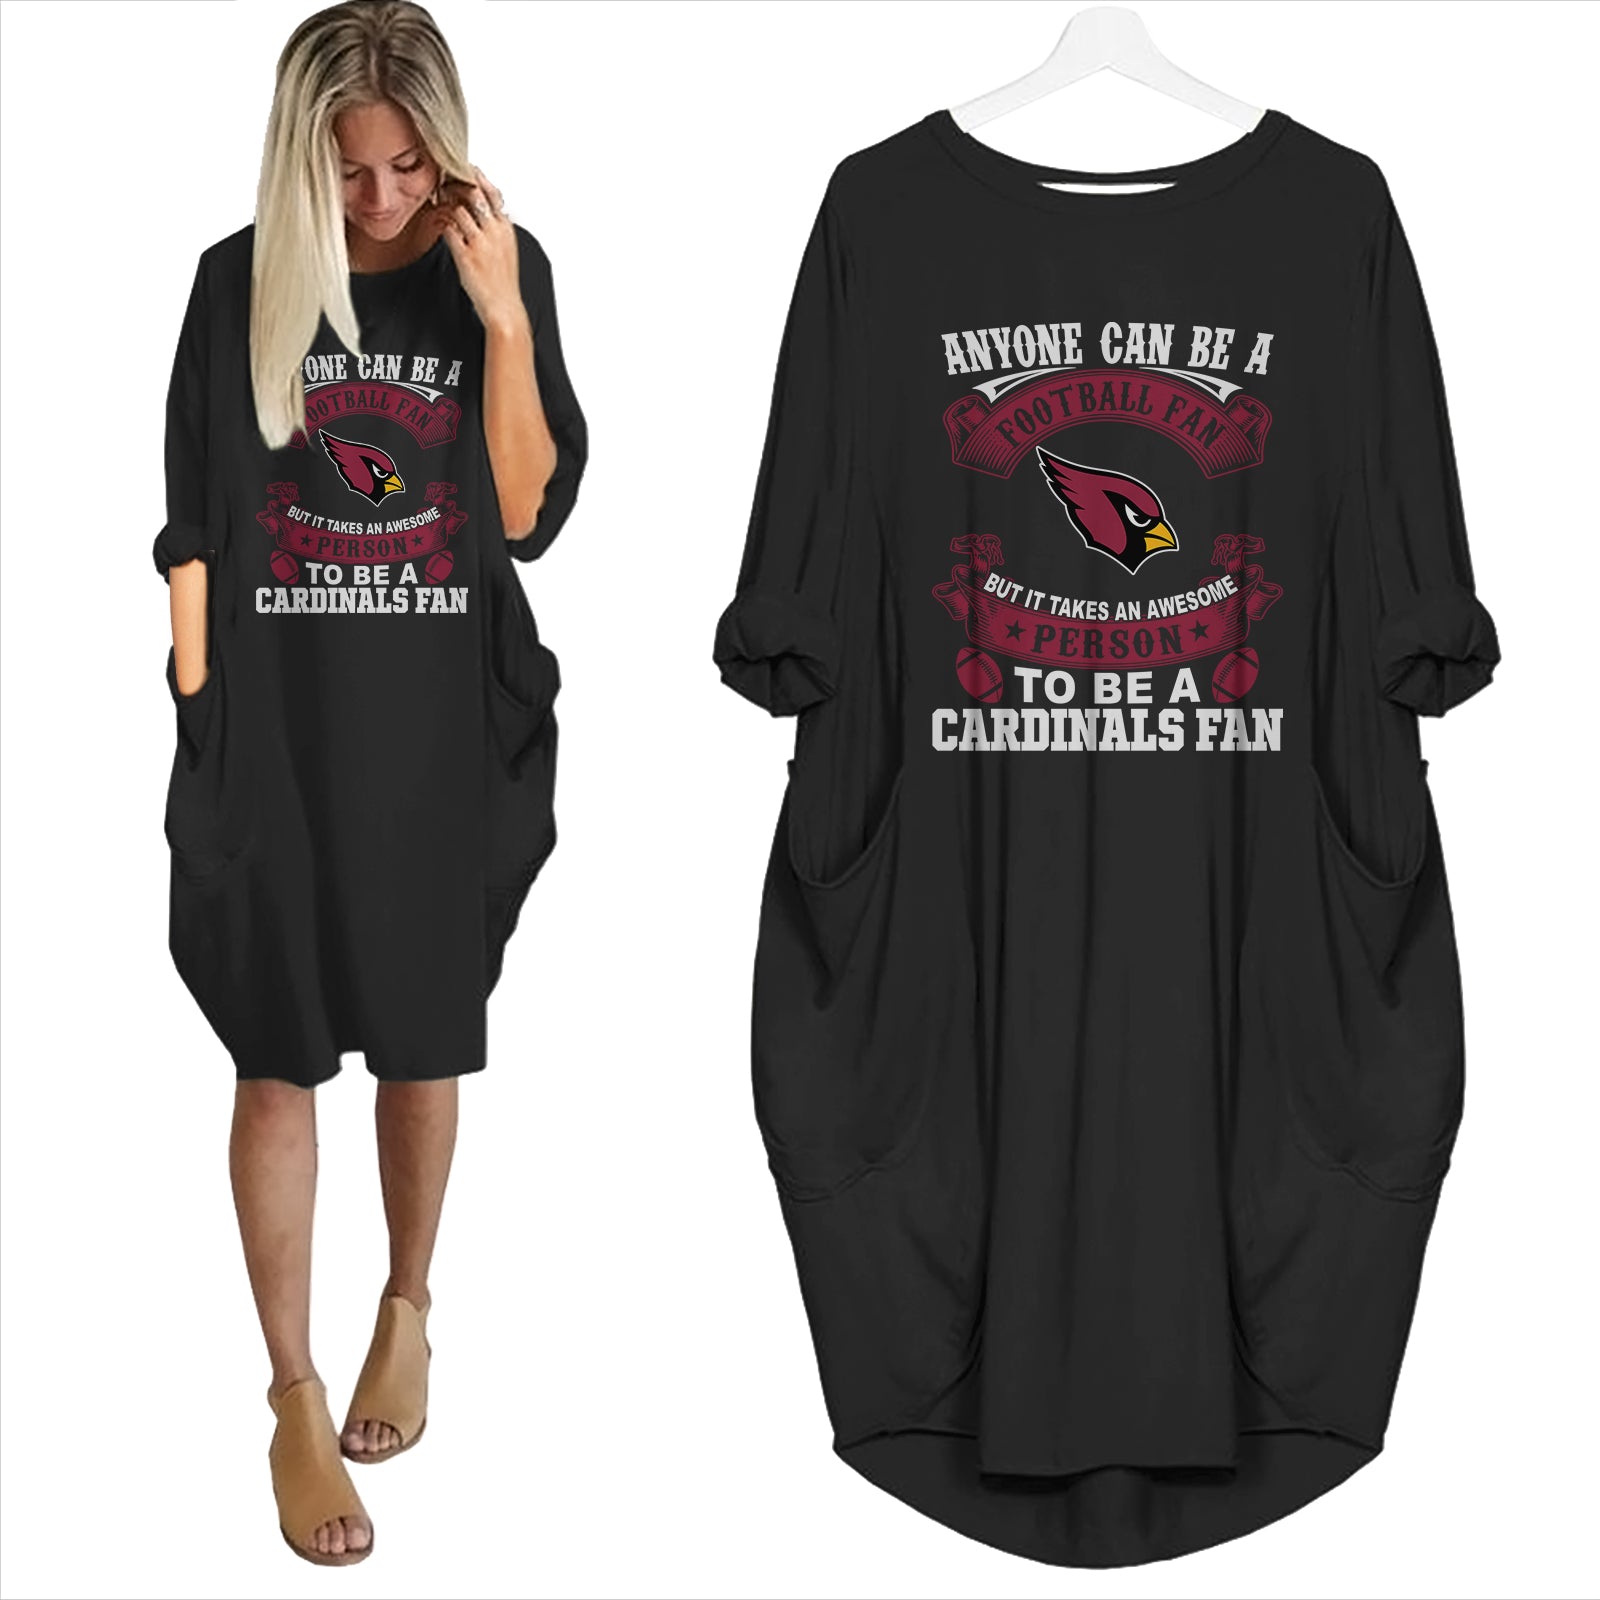 Arizona Cardinals Awesome Fan Loose Casual Pocket T-shirt Dress 6 Colors Size S-5XL NEW082326